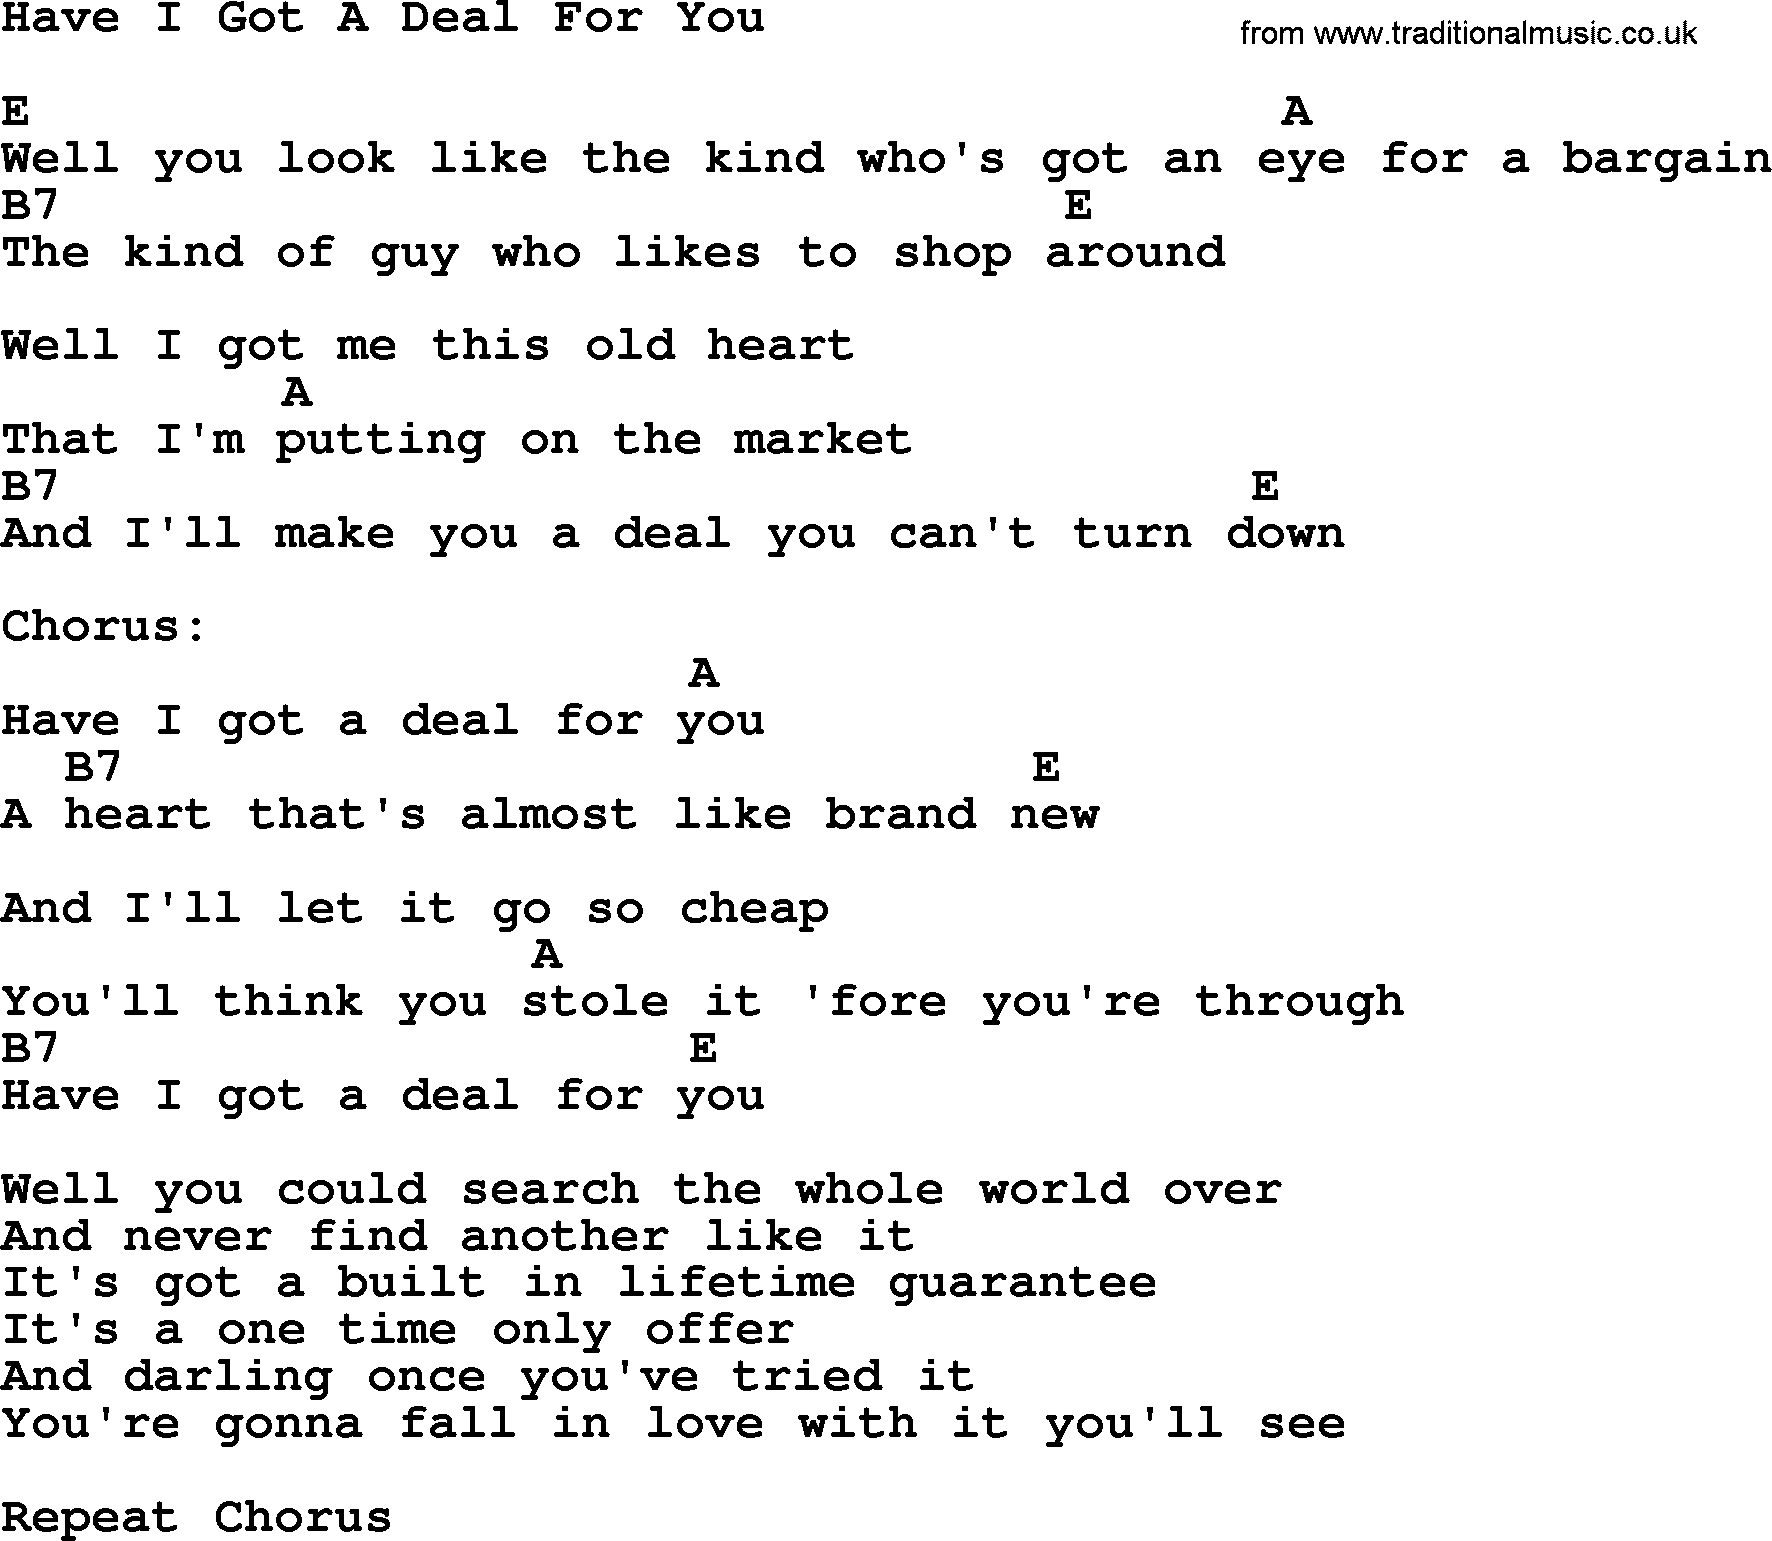 Reba McEntire song: Have I Got A Deal For You, lyrics and chords